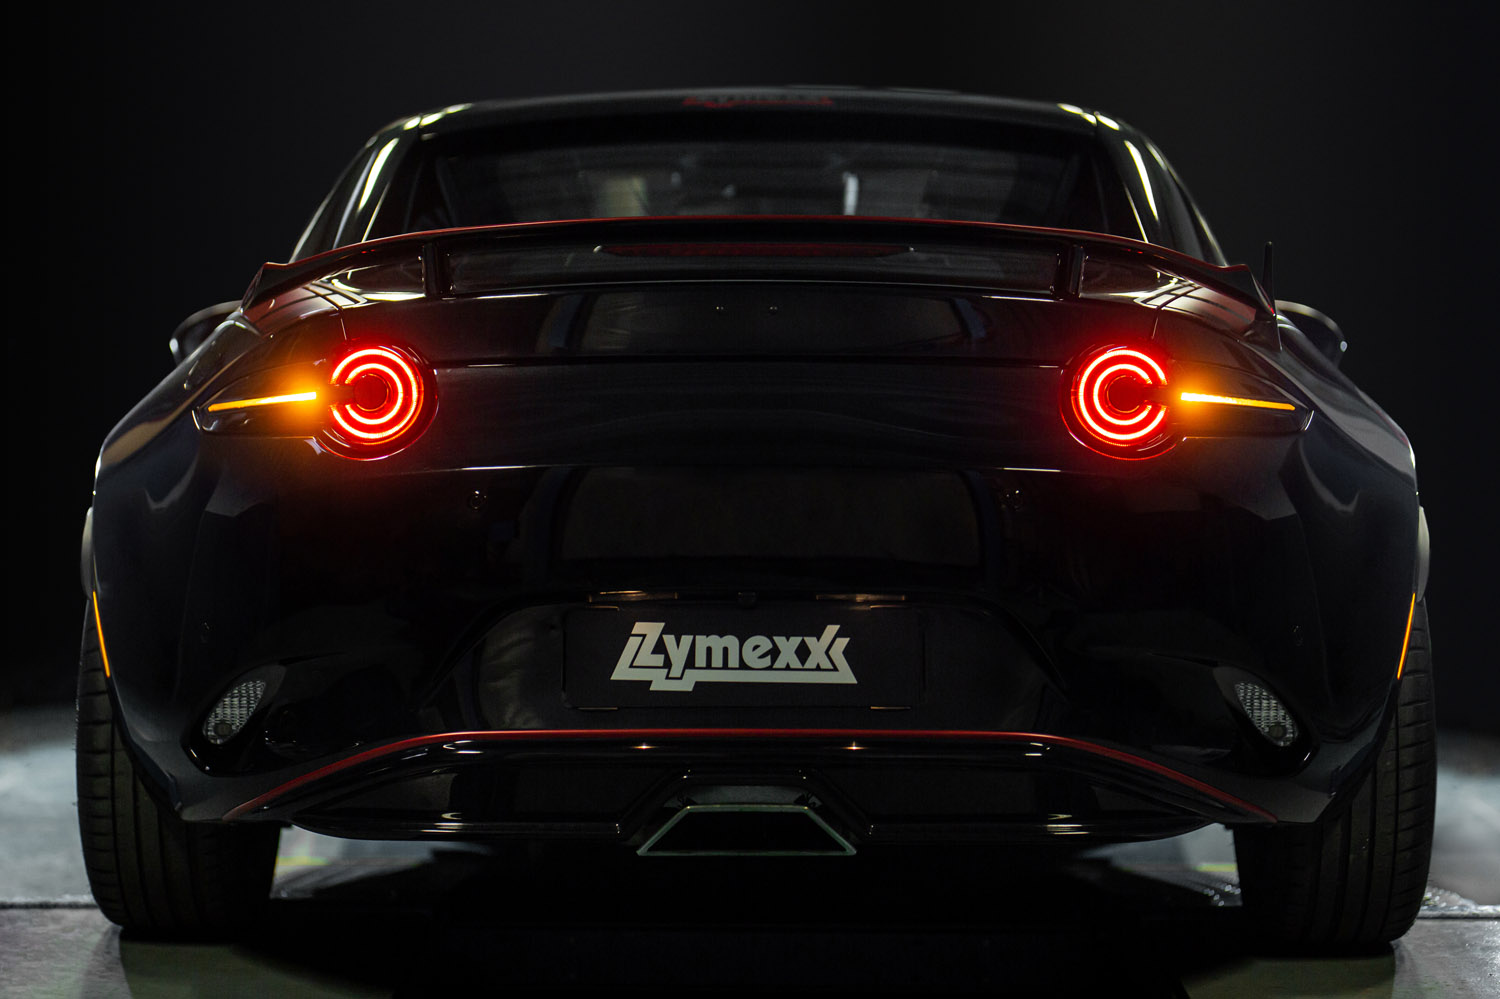 Zymexx LED Tinted Sequential Tail Lights are very bright